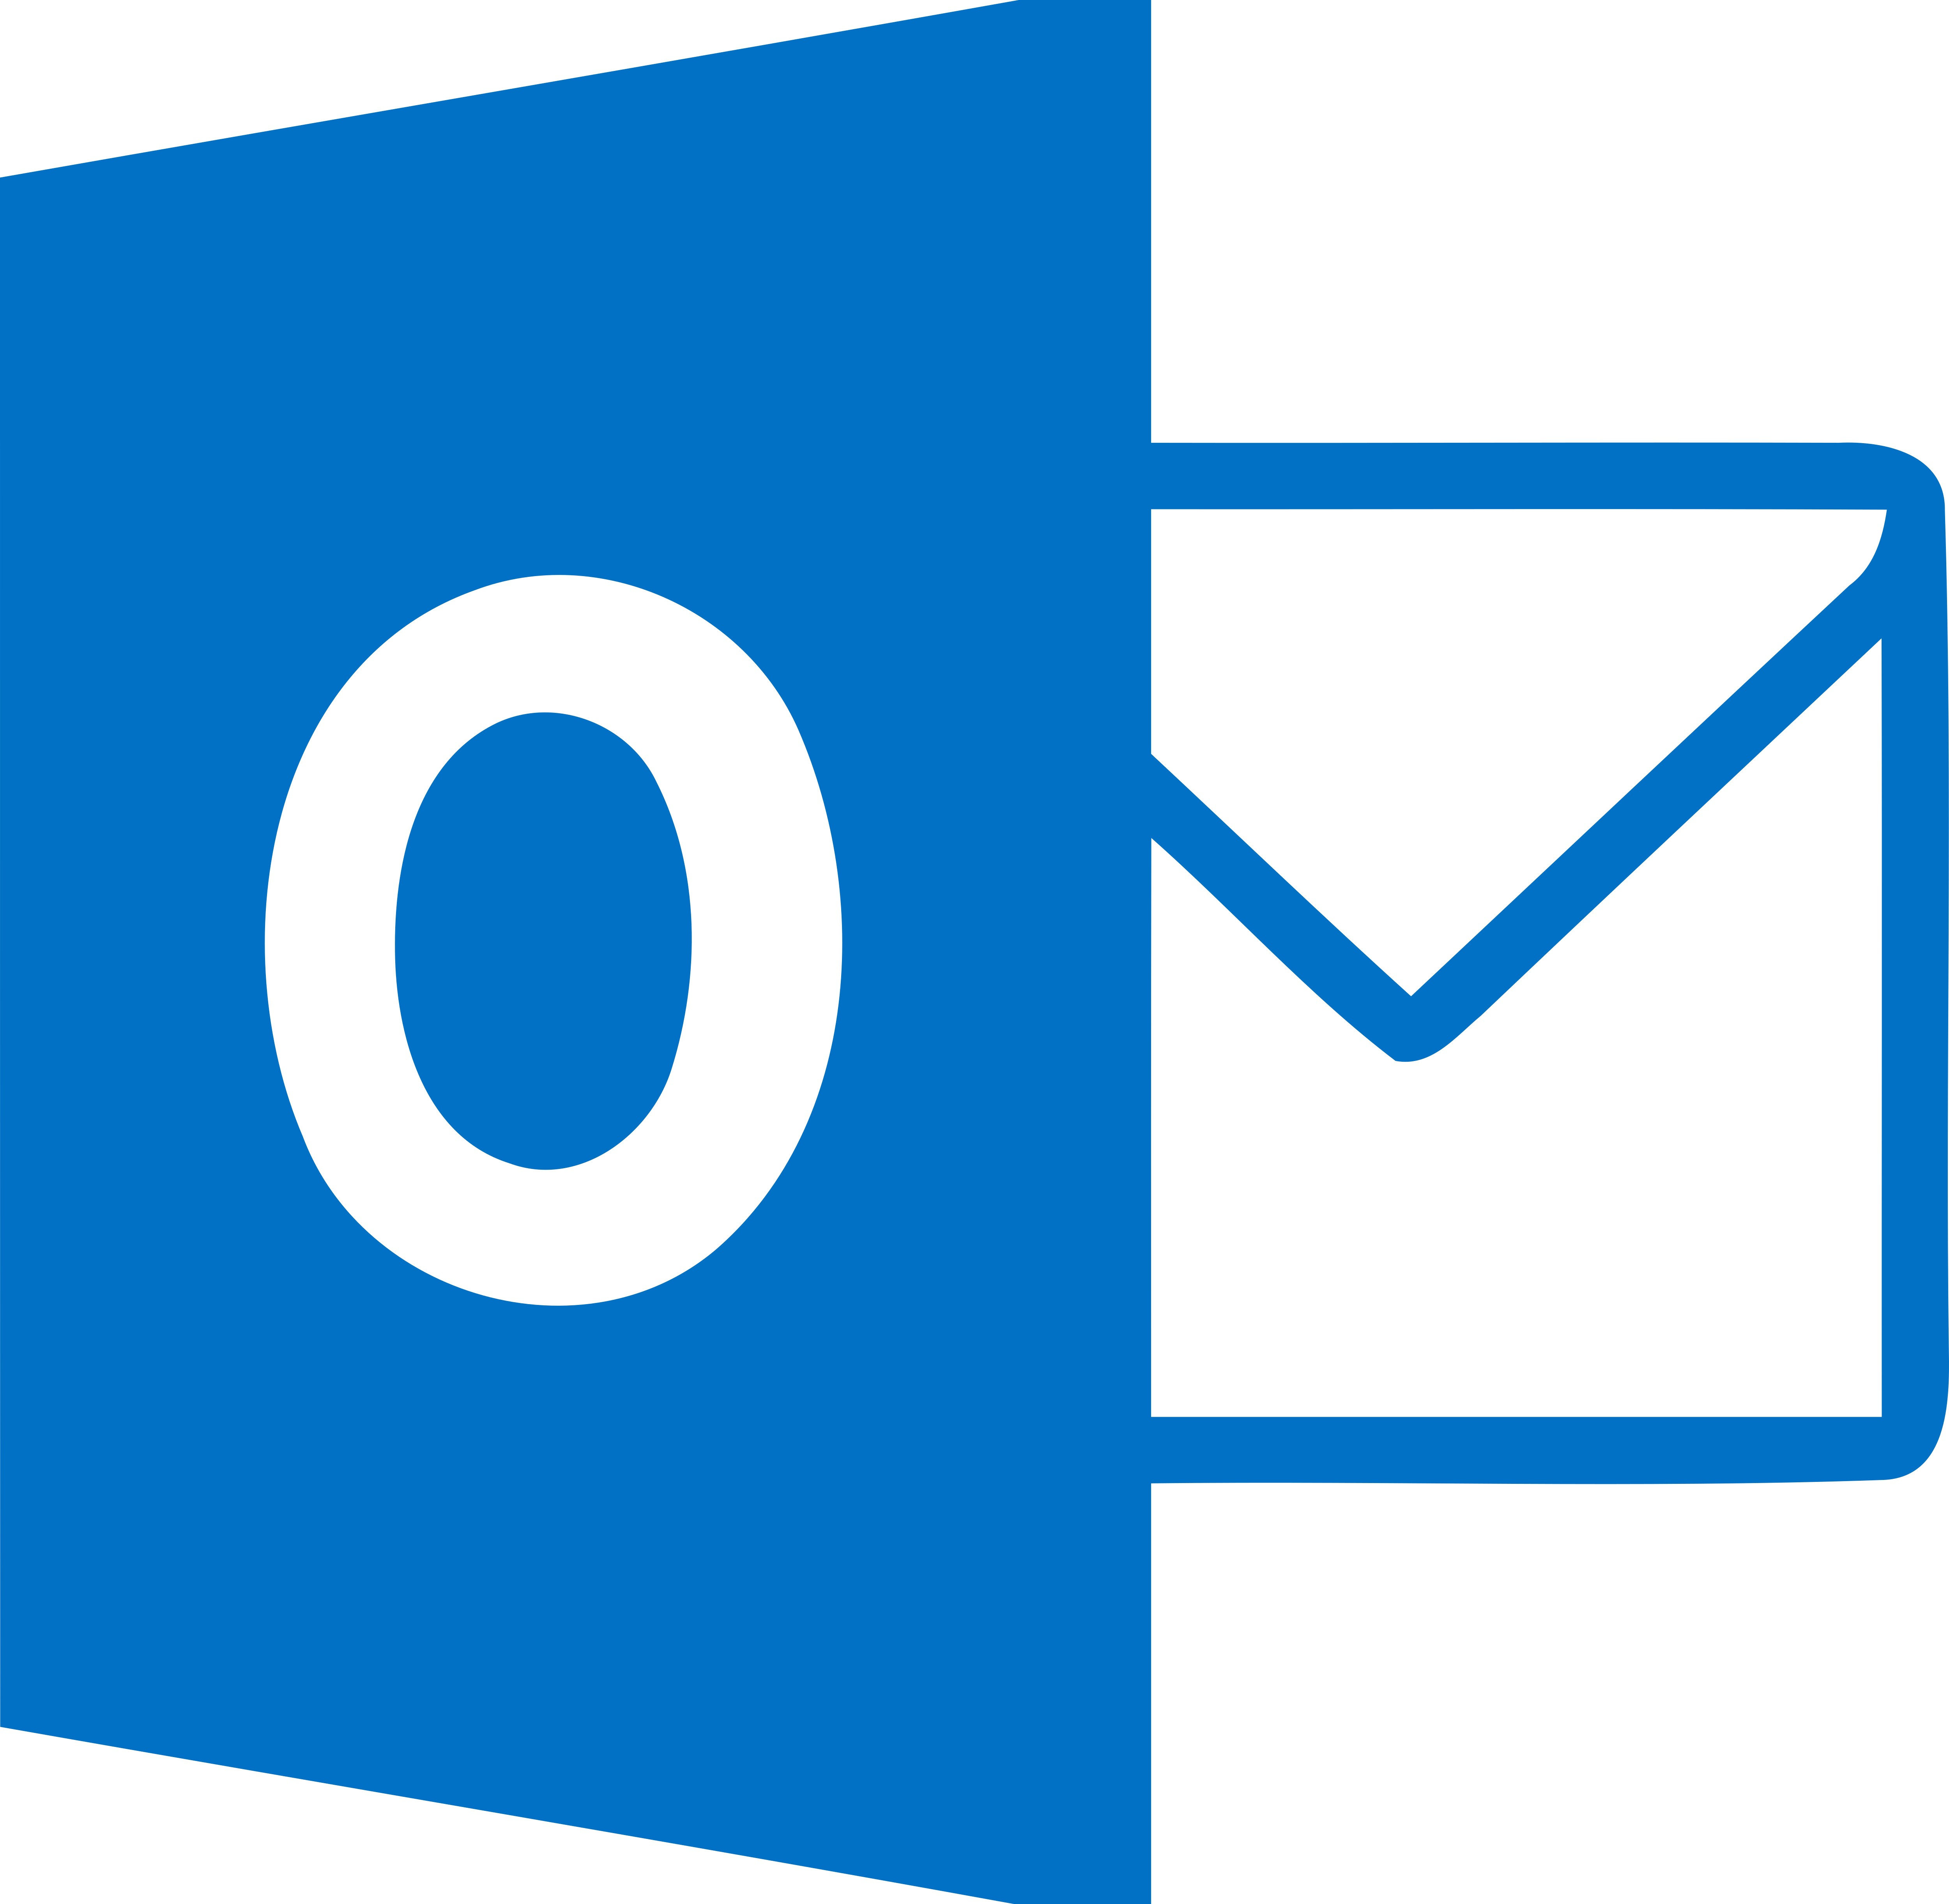 outlook 2013 free download for windows 10